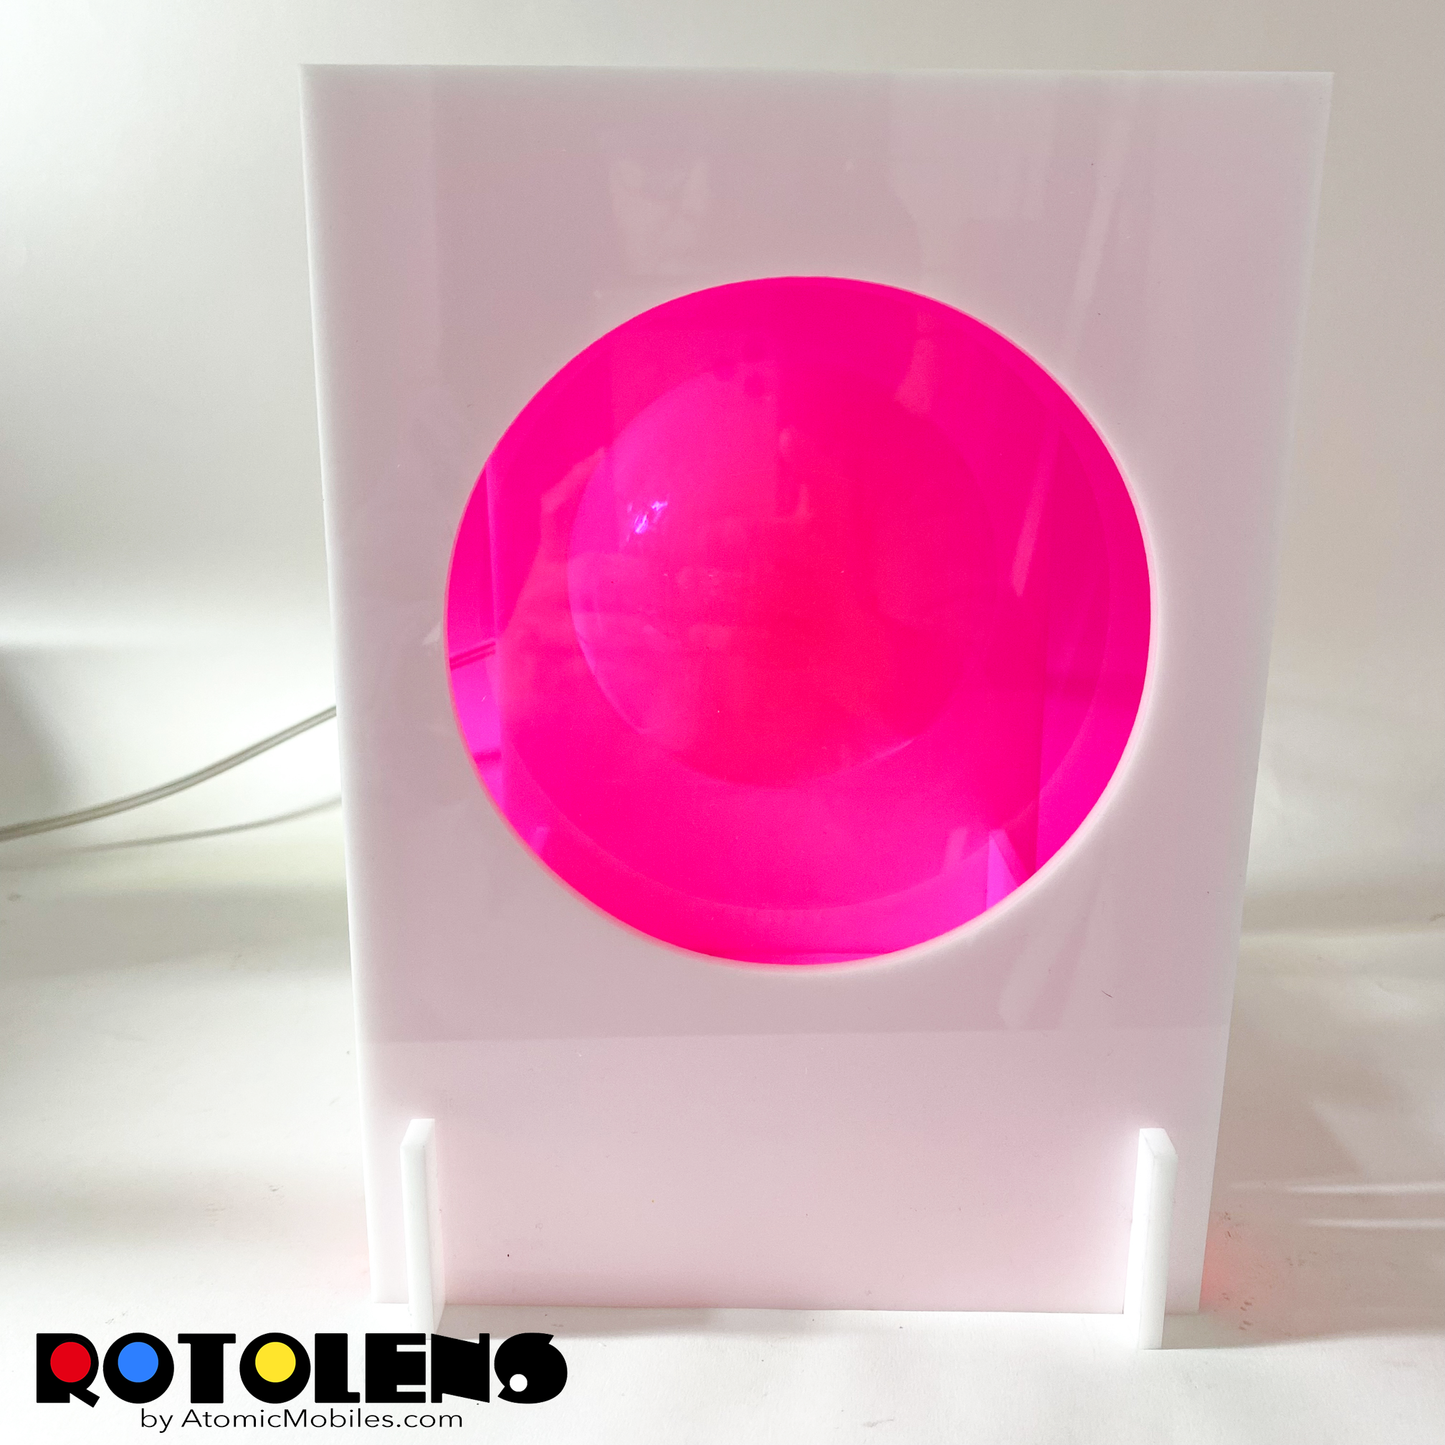 Front view of ROTOLENS Space Age Lamp with interchangeable clear plexiglass lens in Fluorescent Hot Pink by AtomicMobiles.com